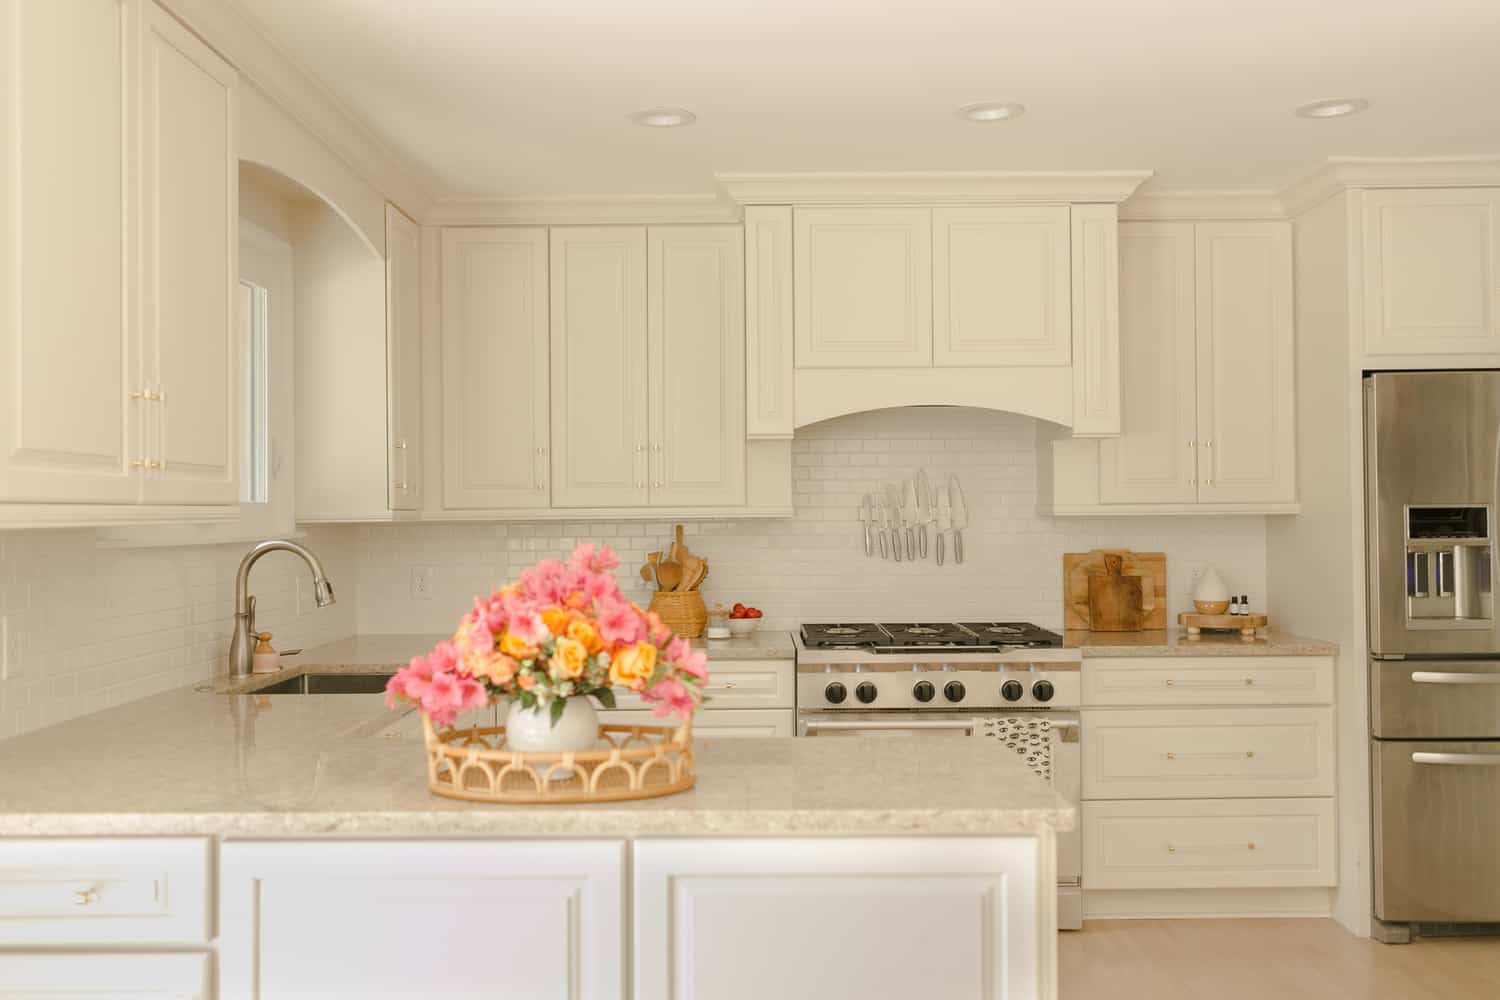 Best Paint For Kitchen Cabinets, What S The Best Paint To Use Kitchen Cabinets